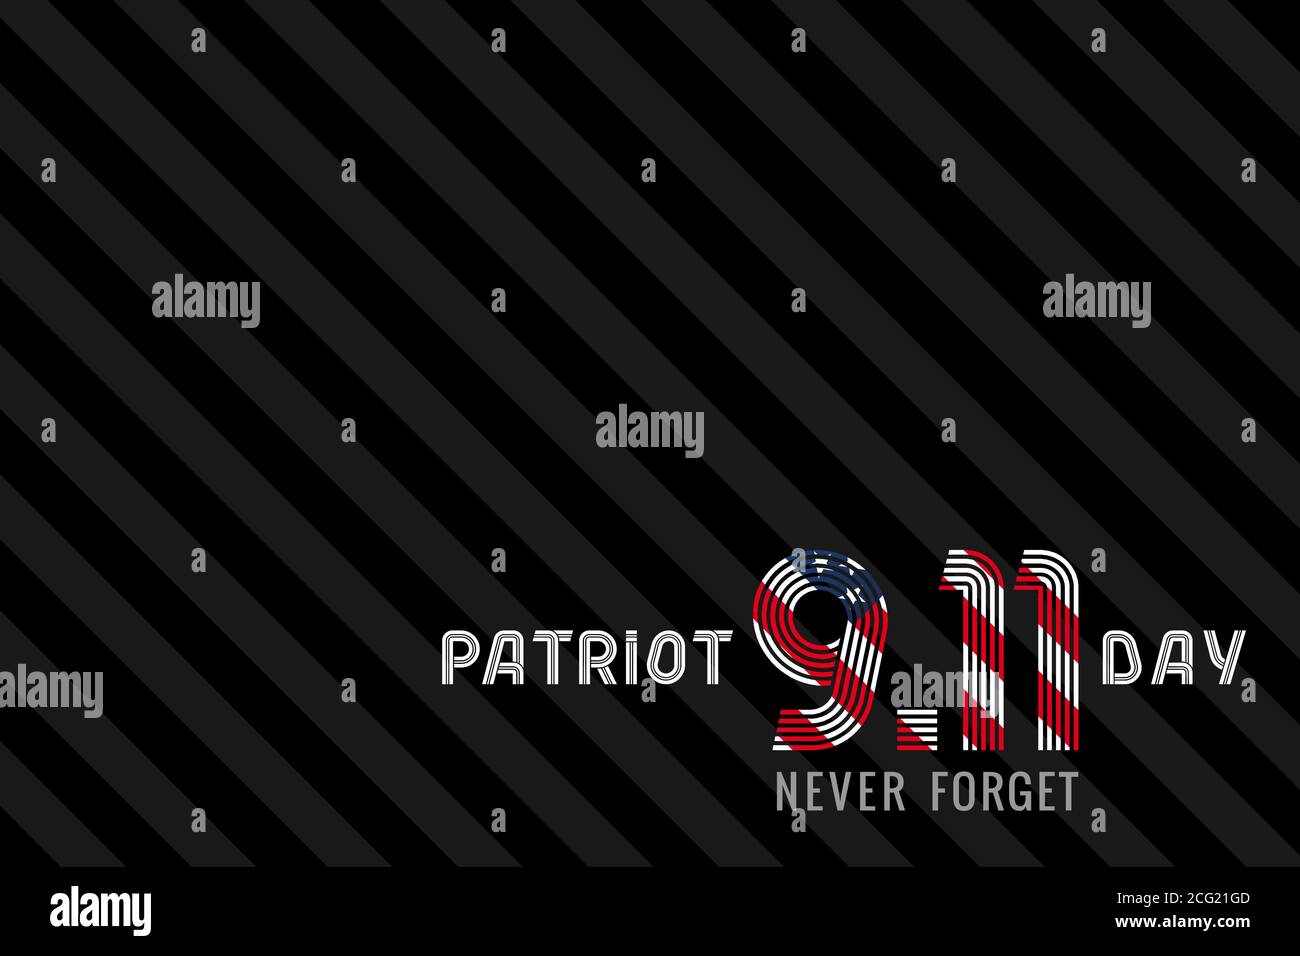 Patriot day USA, Never forget 9/11 striped background. September 11, We Will Never Forget text on black lines Stock Vector